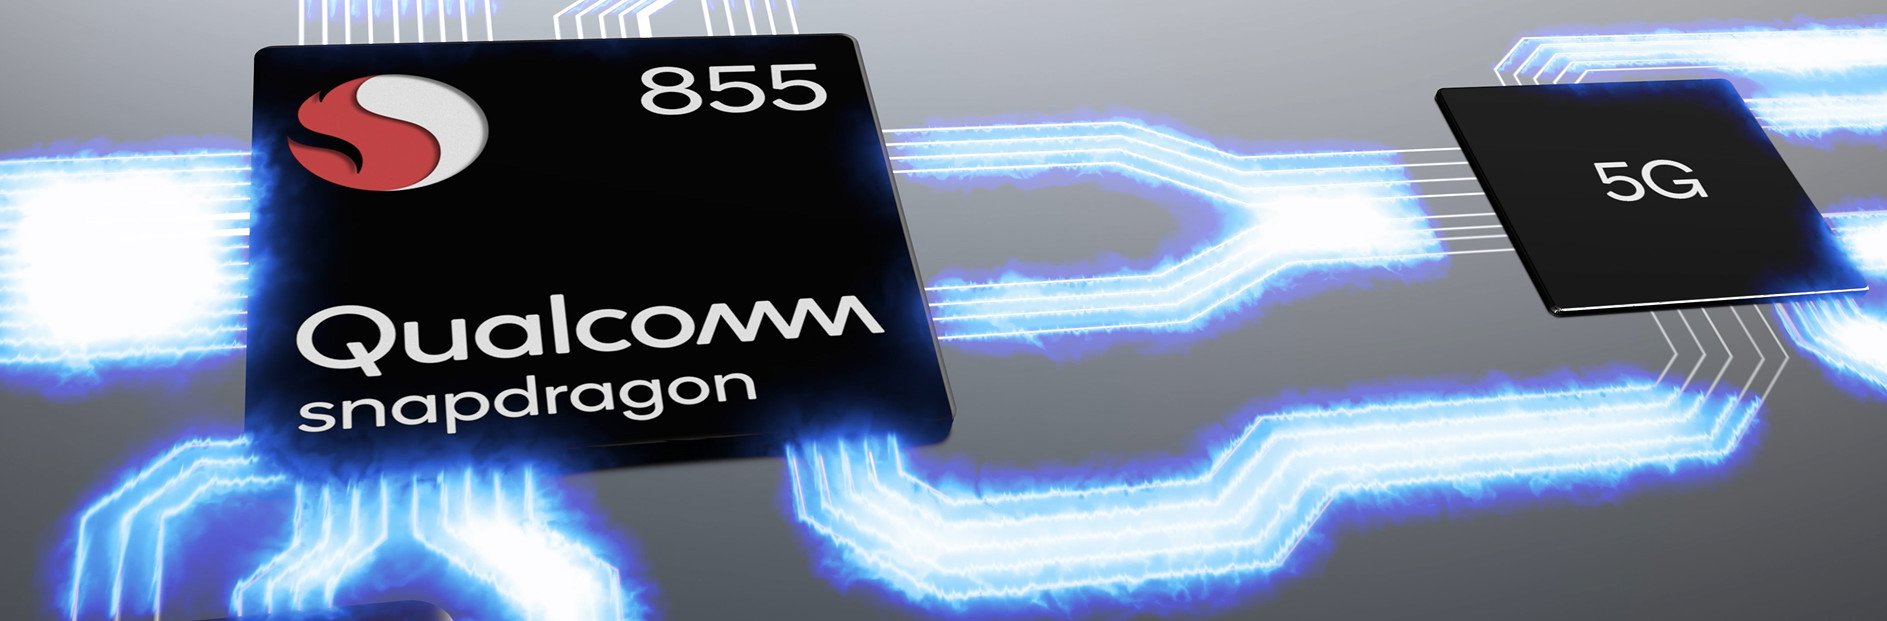 Qualcomm Snapdragon 855 and 5G